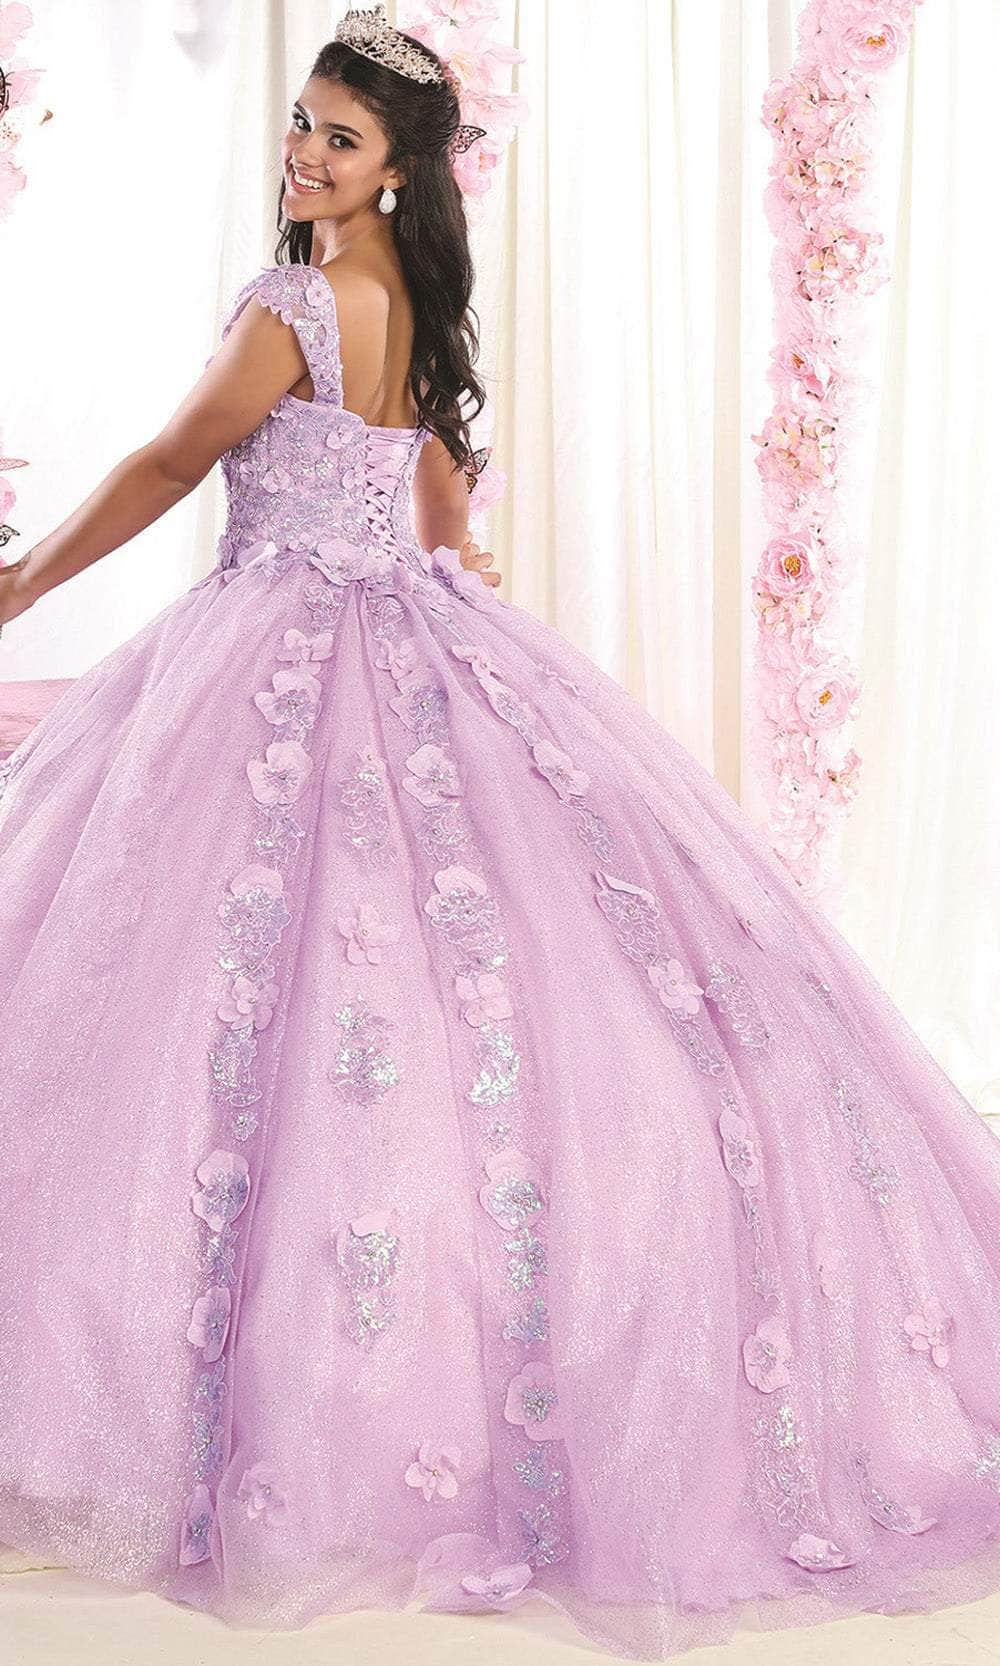 May Queen LK171 - Wide Strap Floral Glitter Ballgown Ball Gowns